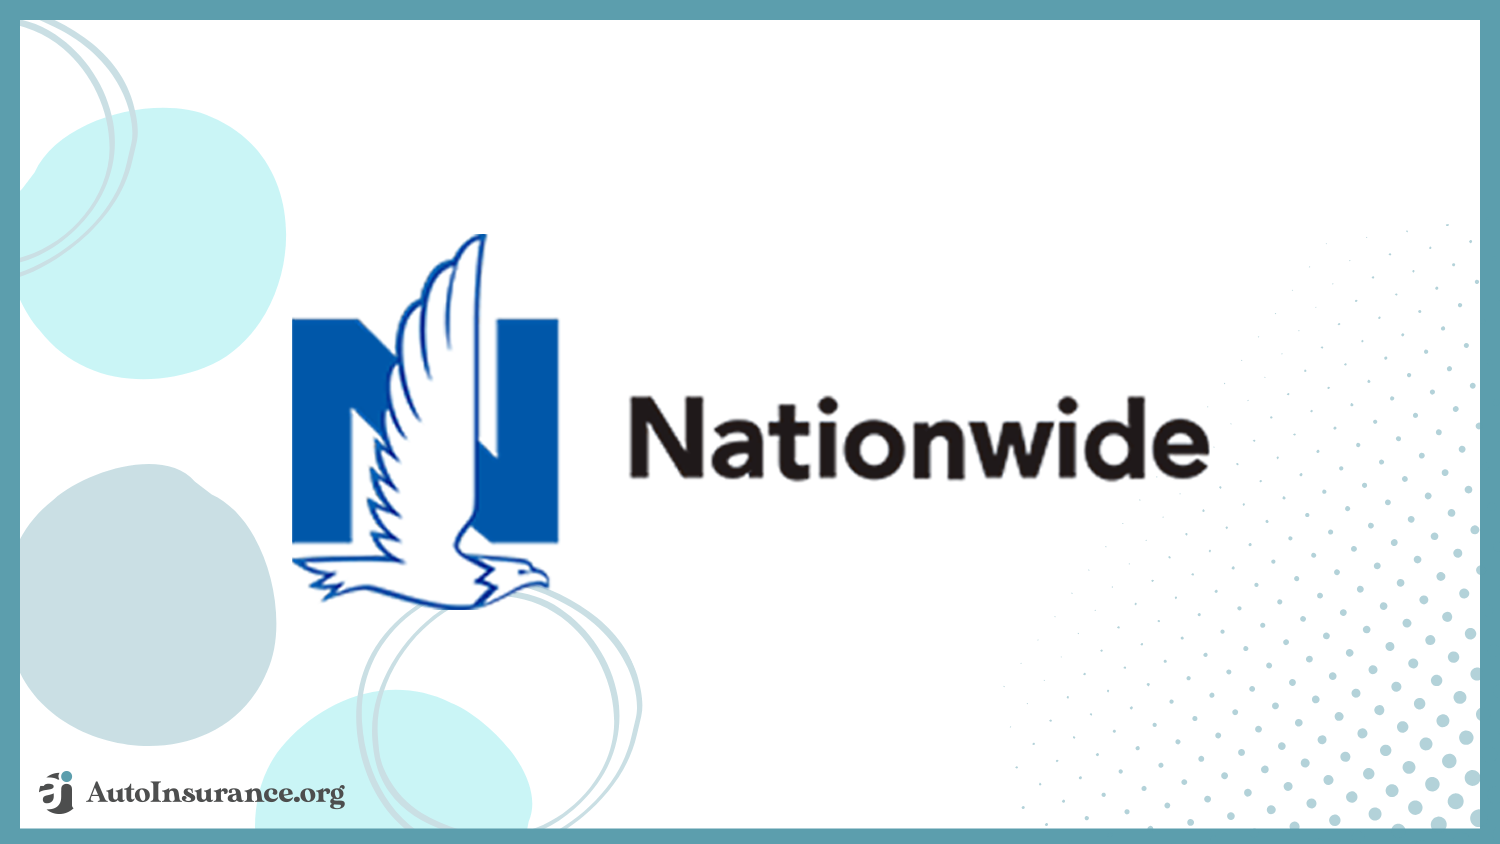 Nationwide: Best Auto Insurance for State Employees